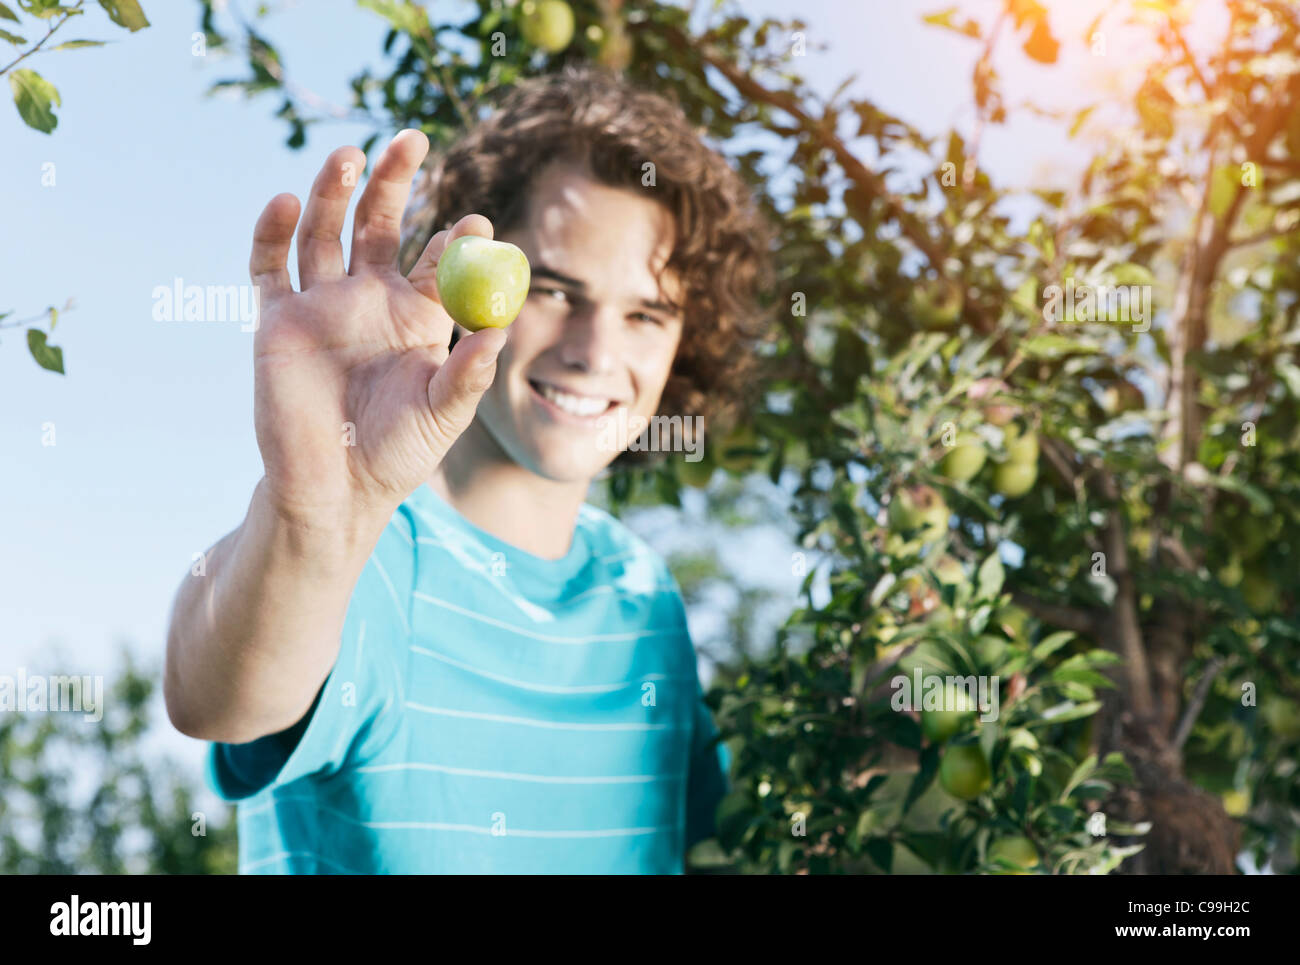 Italy, Tuscany, Magliano, Young man holding green olive, smiling, portrait Stock Photo